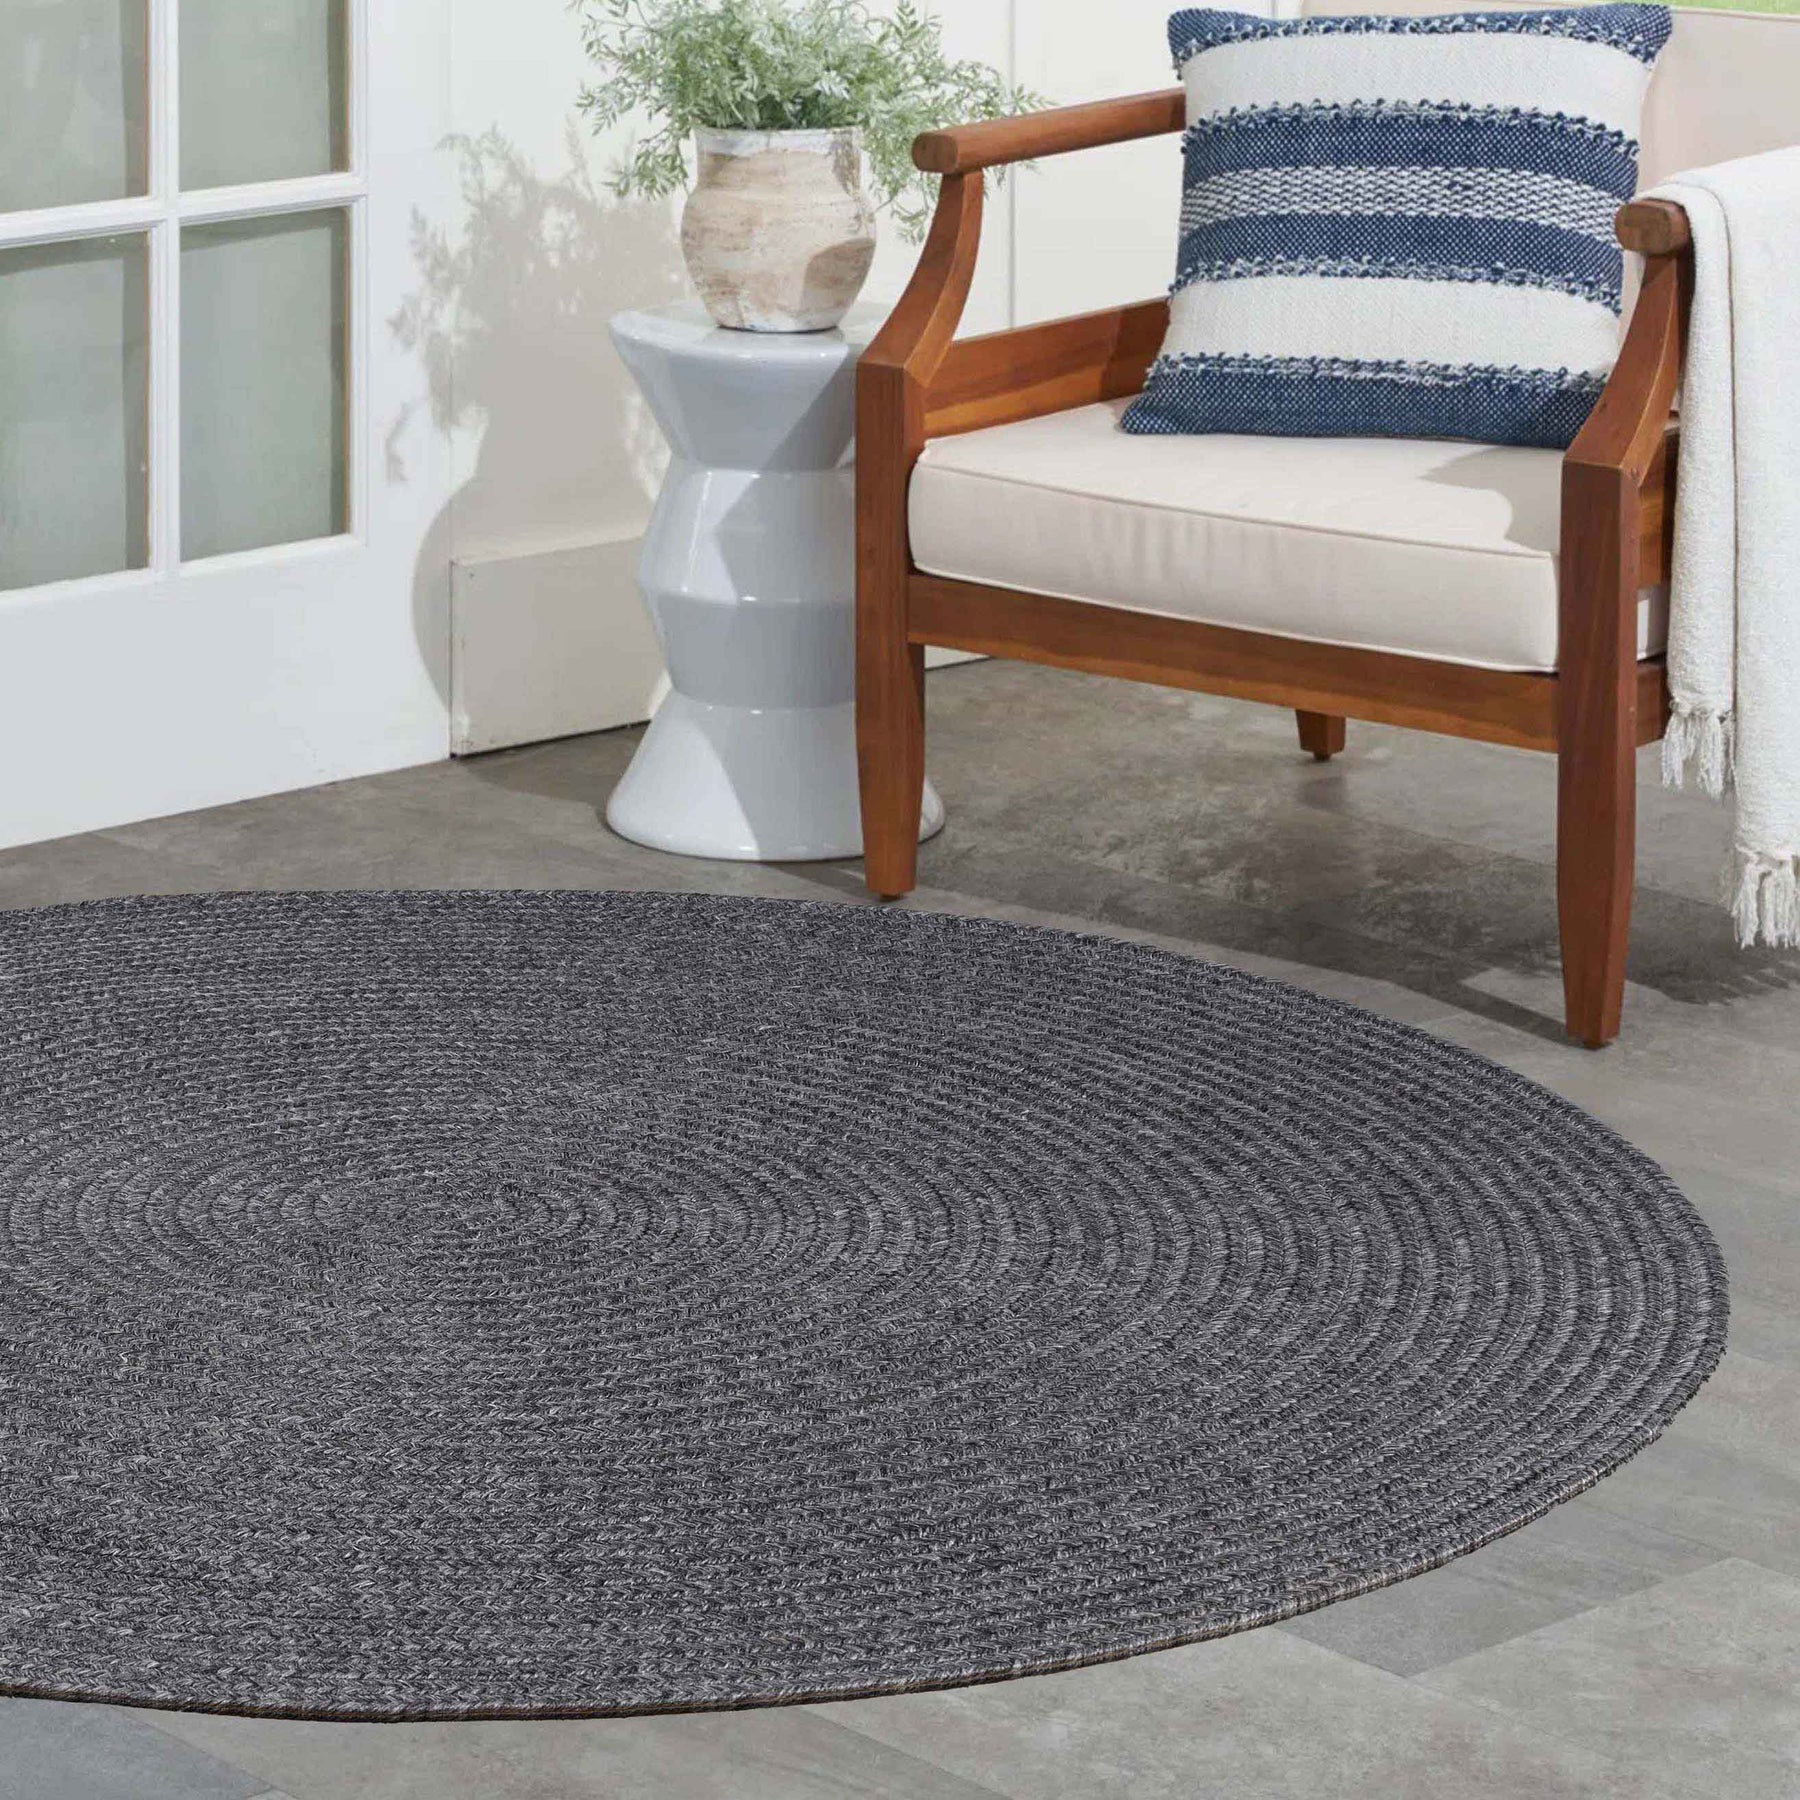 Bohemian Braided Indoor Outdoor Rugs Solid Round Area Rug - Charcoal